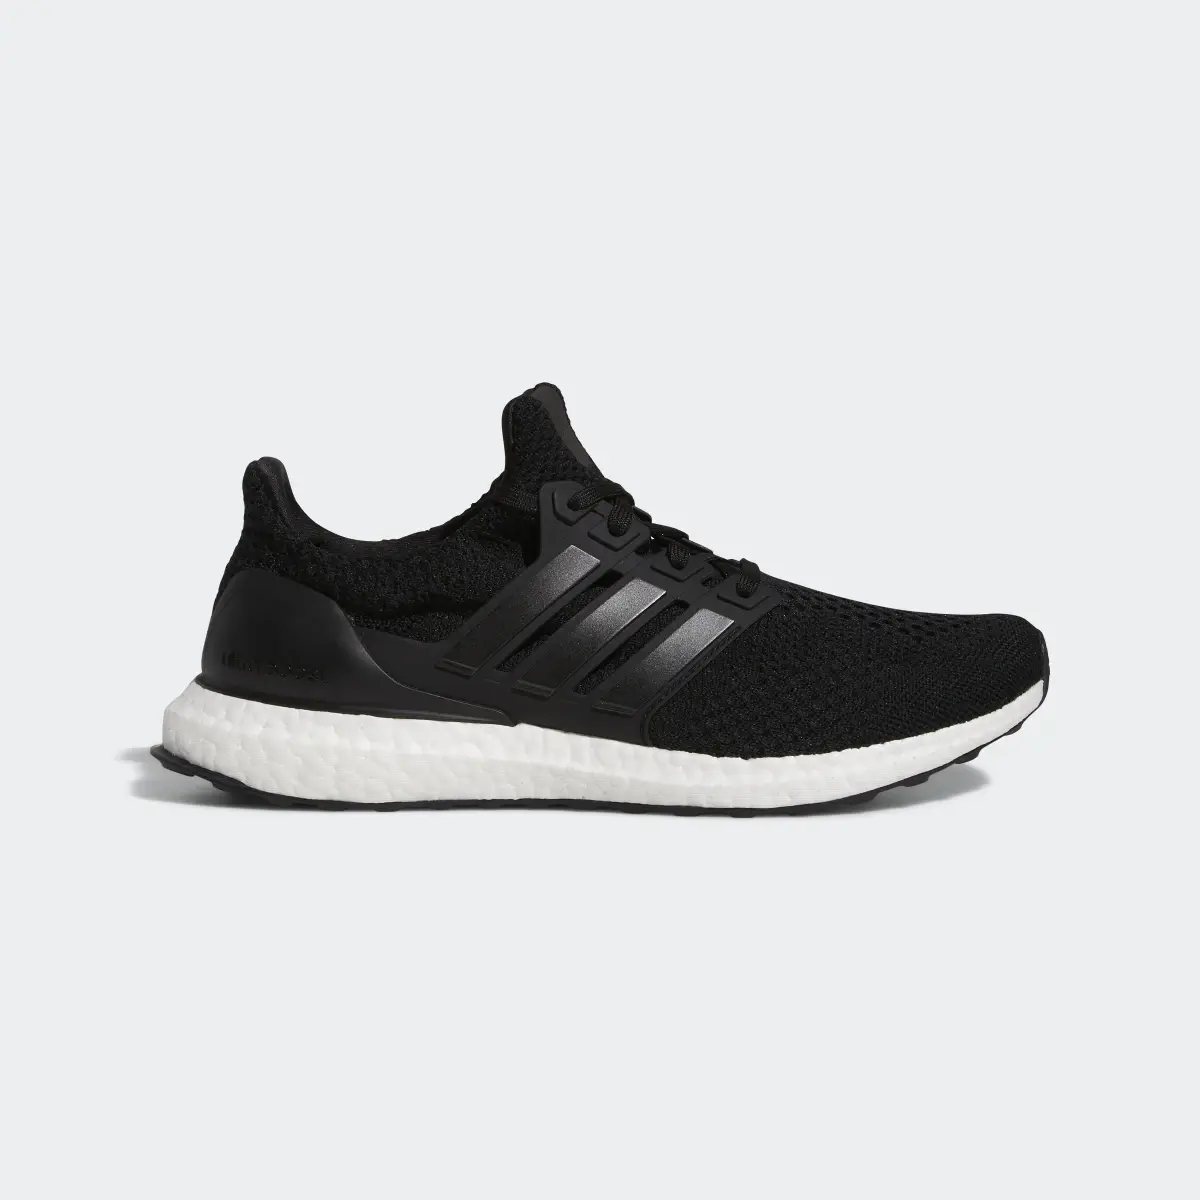 Adidas Ultraboost 5.0 DNA Shoes. 2